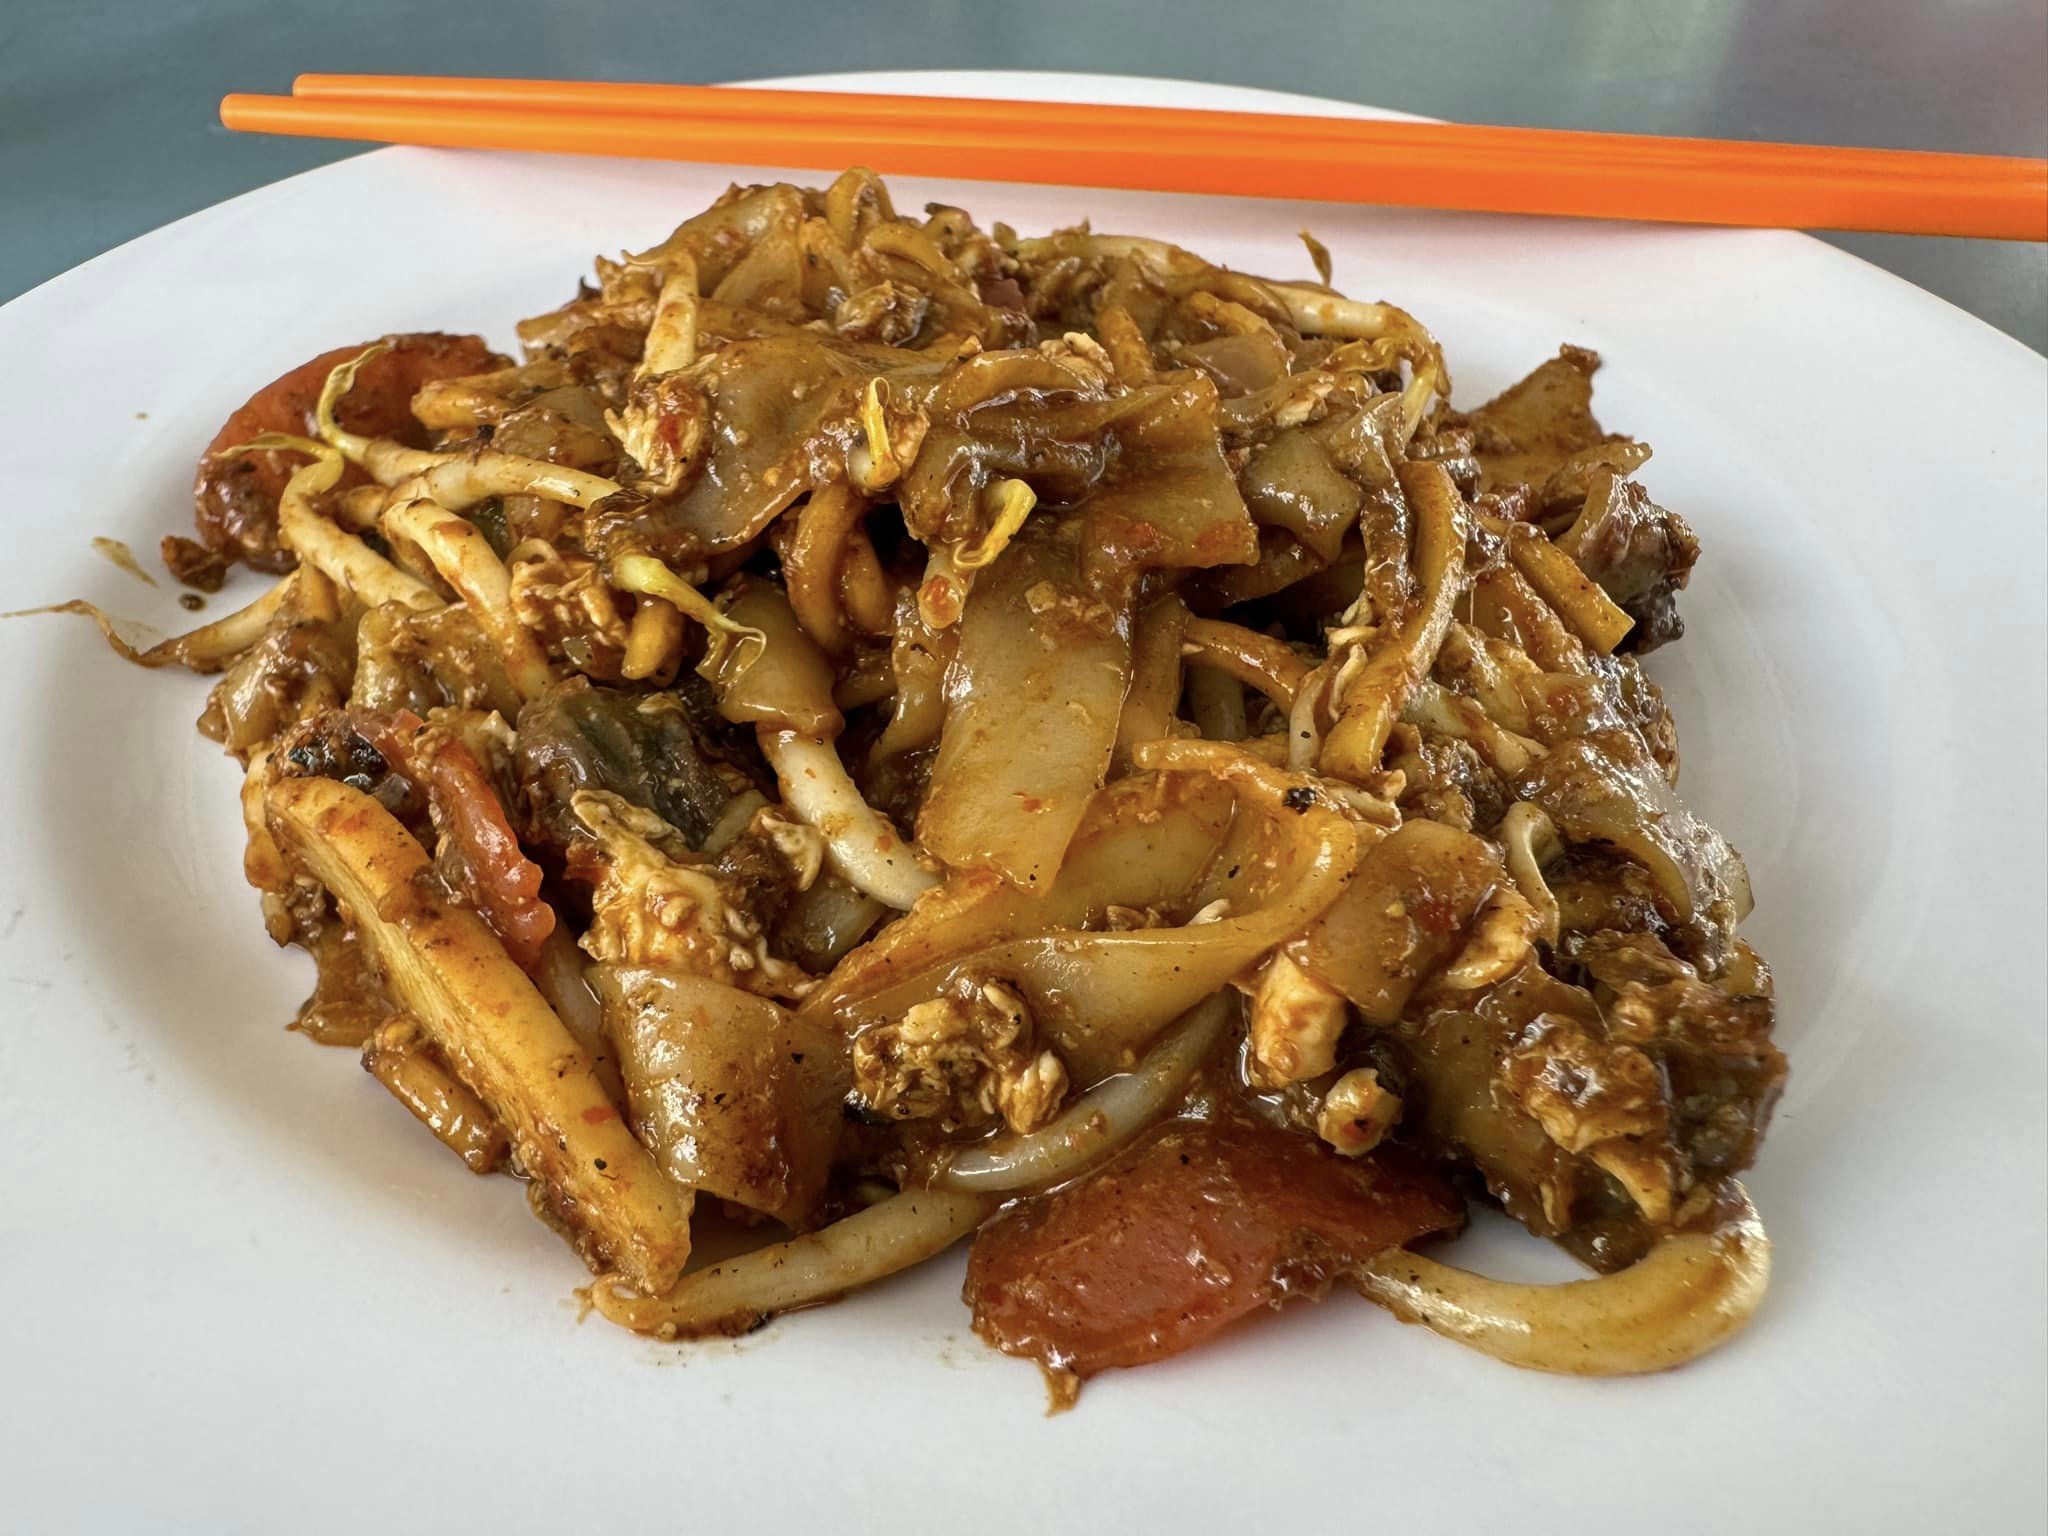 Joo Chiat Place Fried Kway Teow is Good